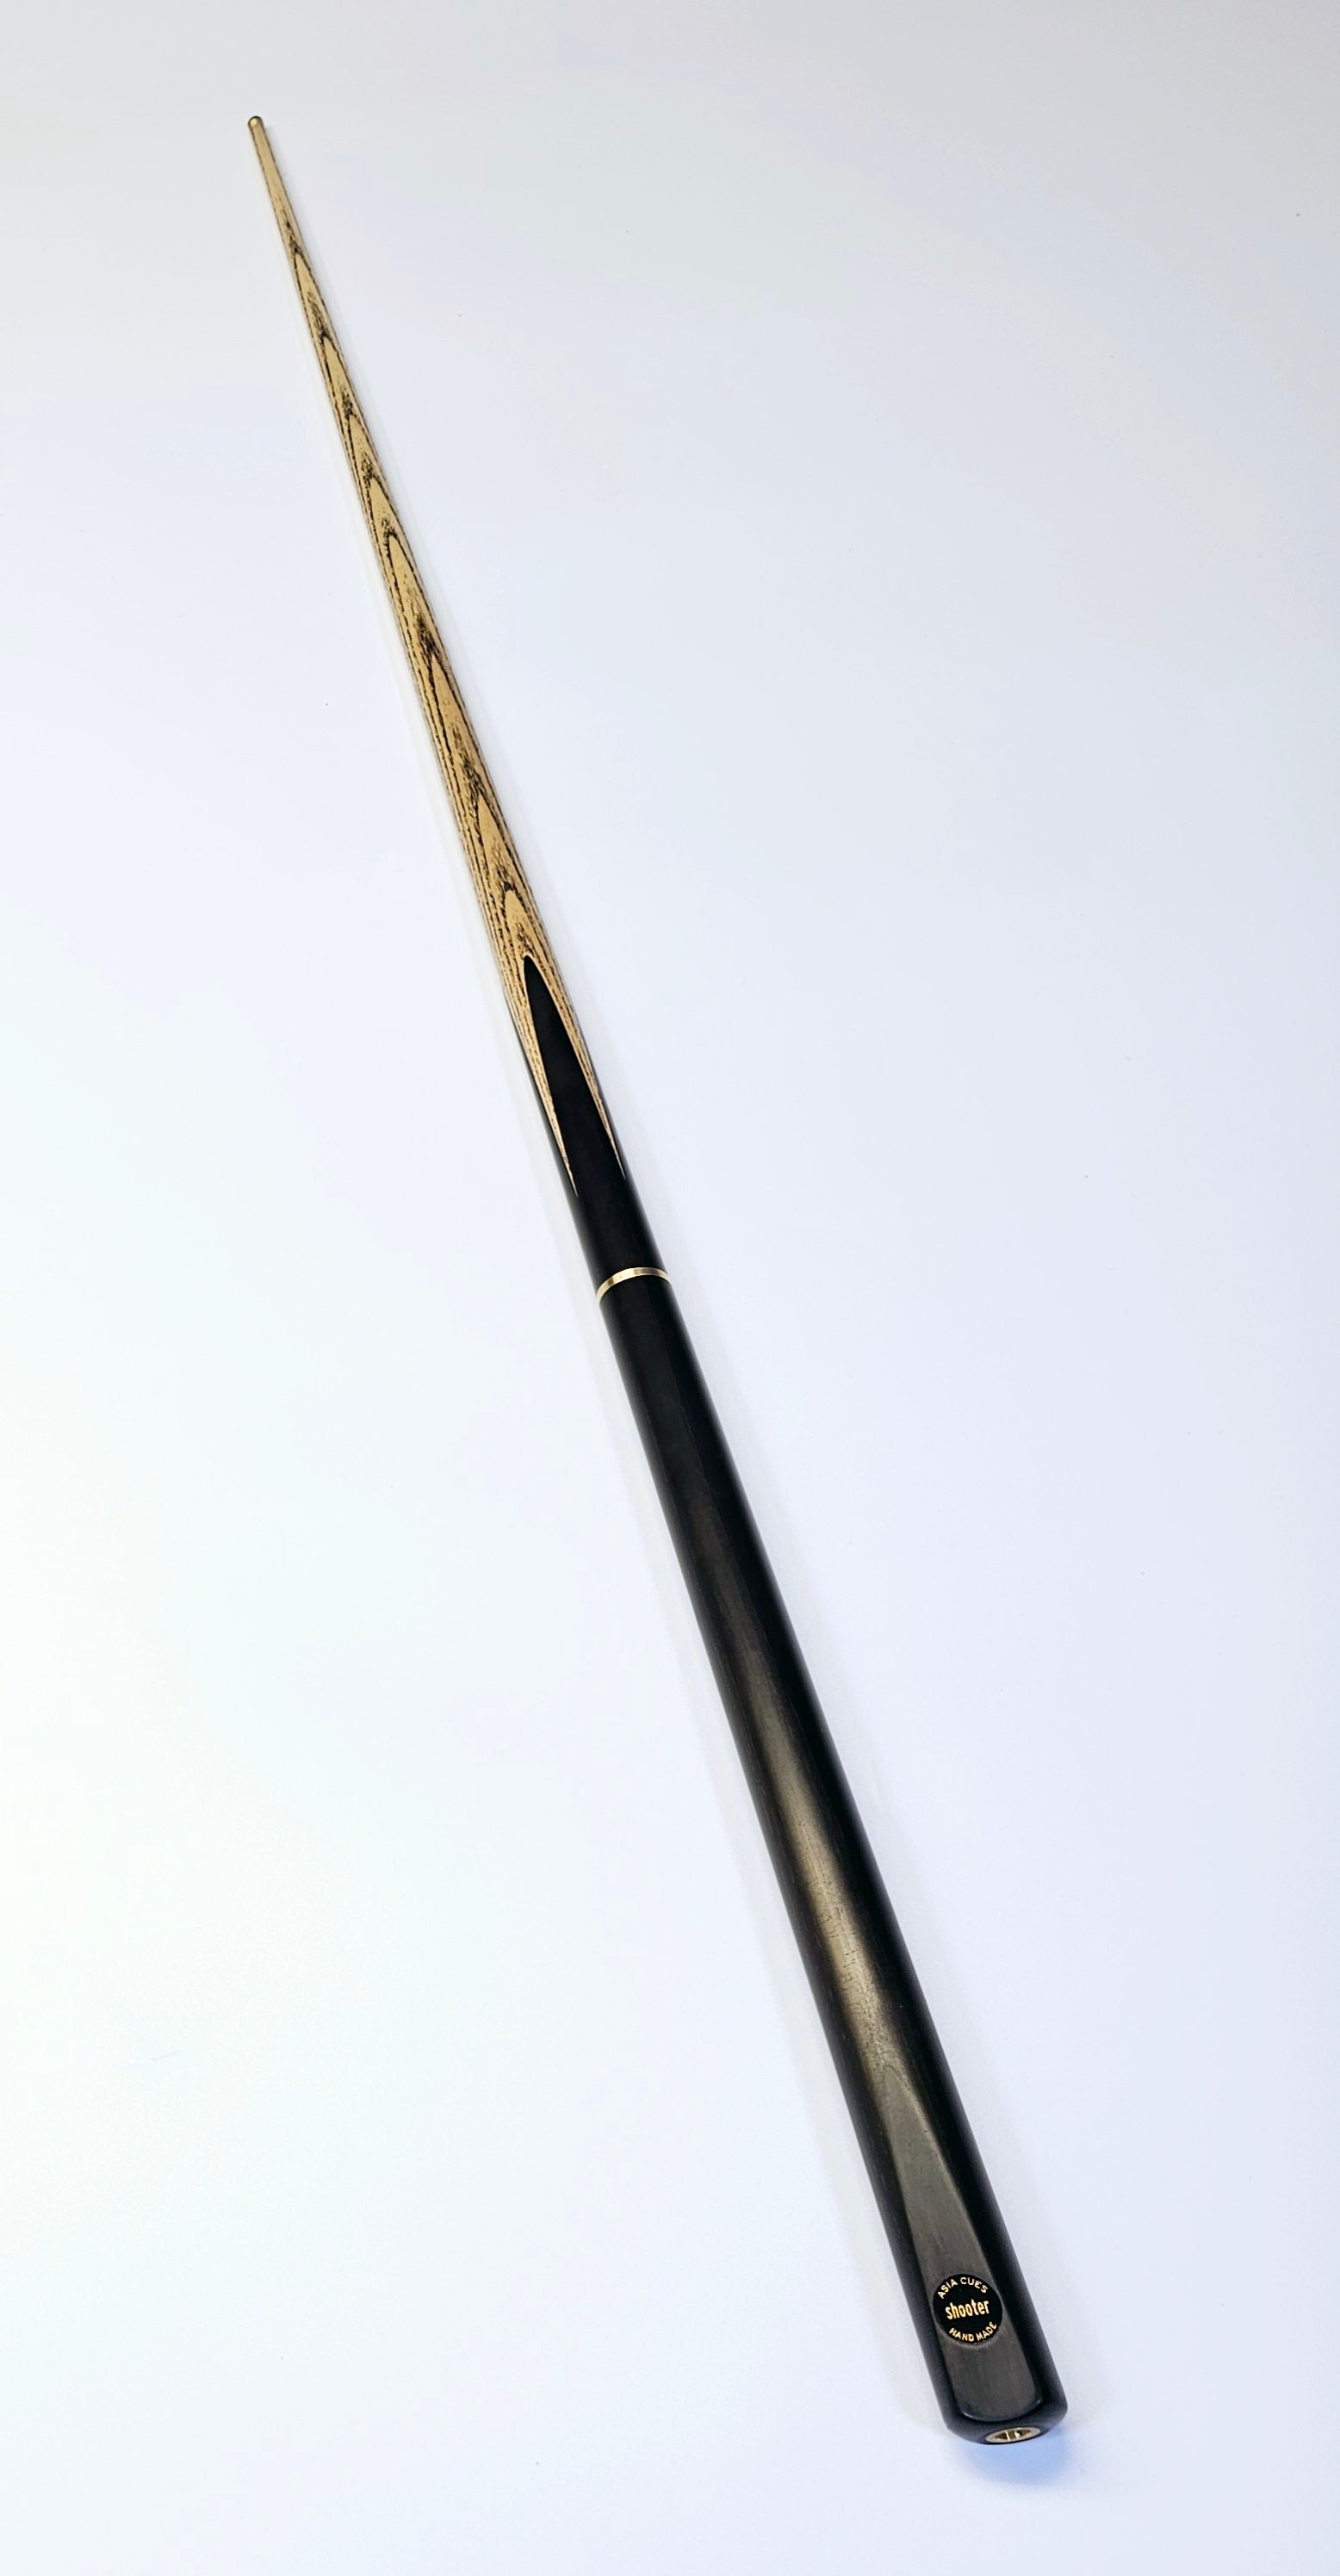 Asia Cues Shooter - 3/4 Jointed Junior Snooker Cue